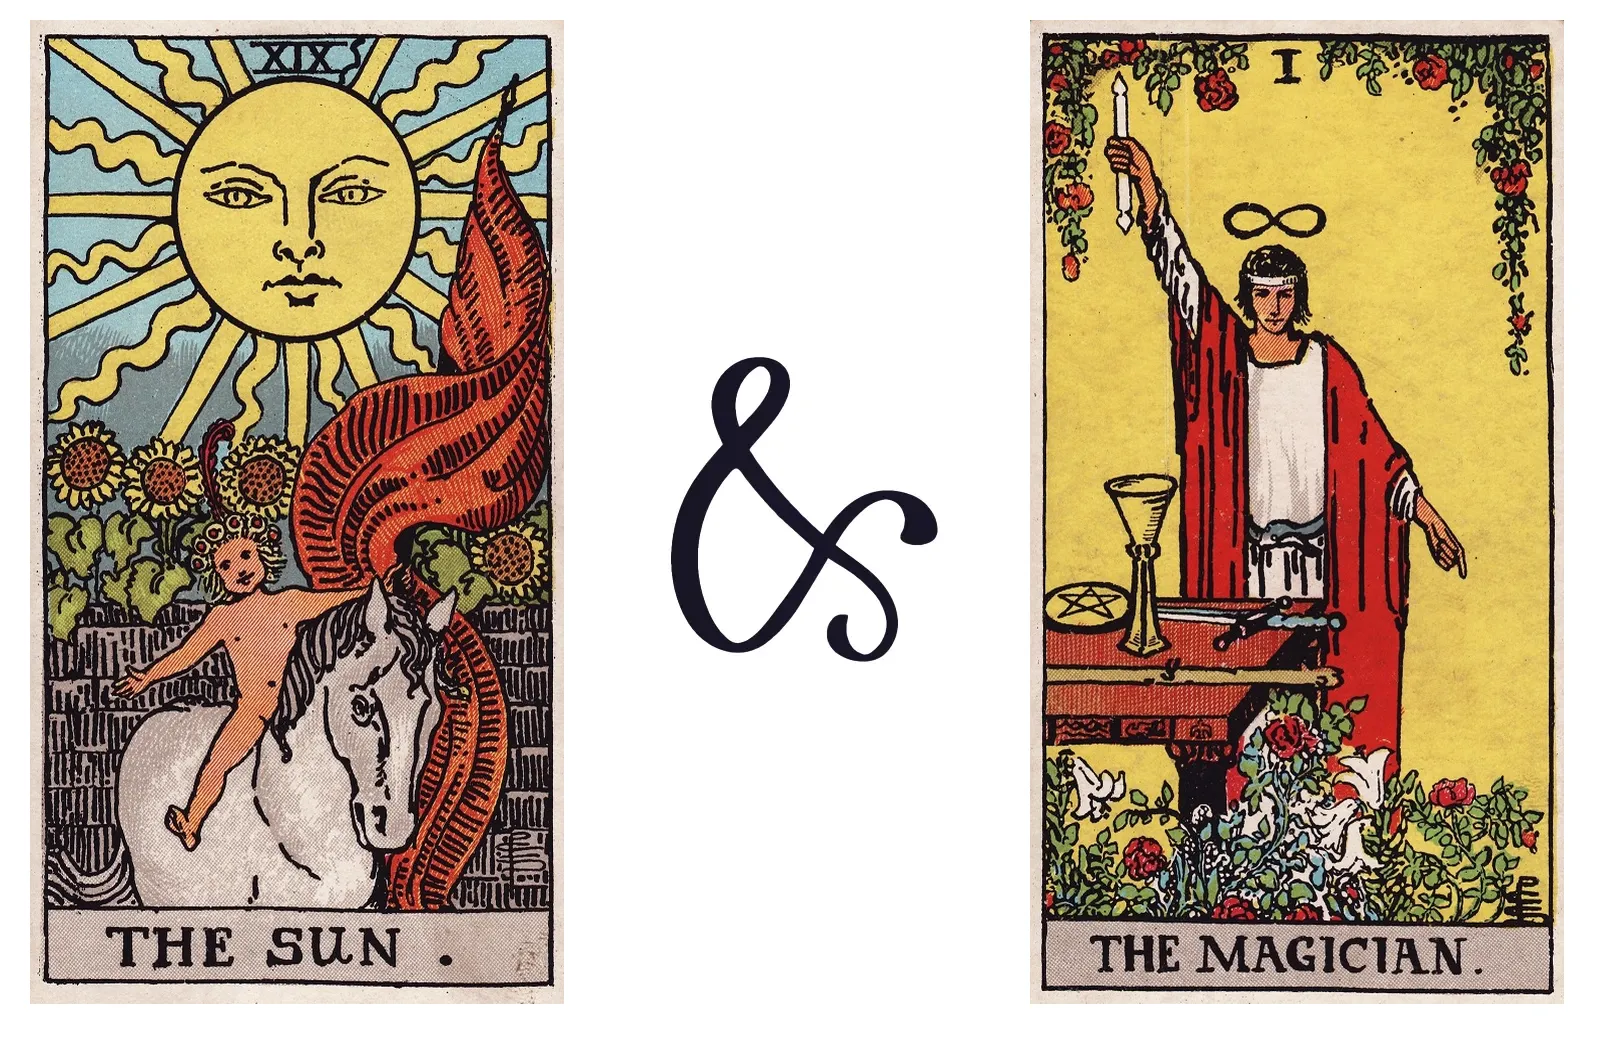 The Sun and The Magician